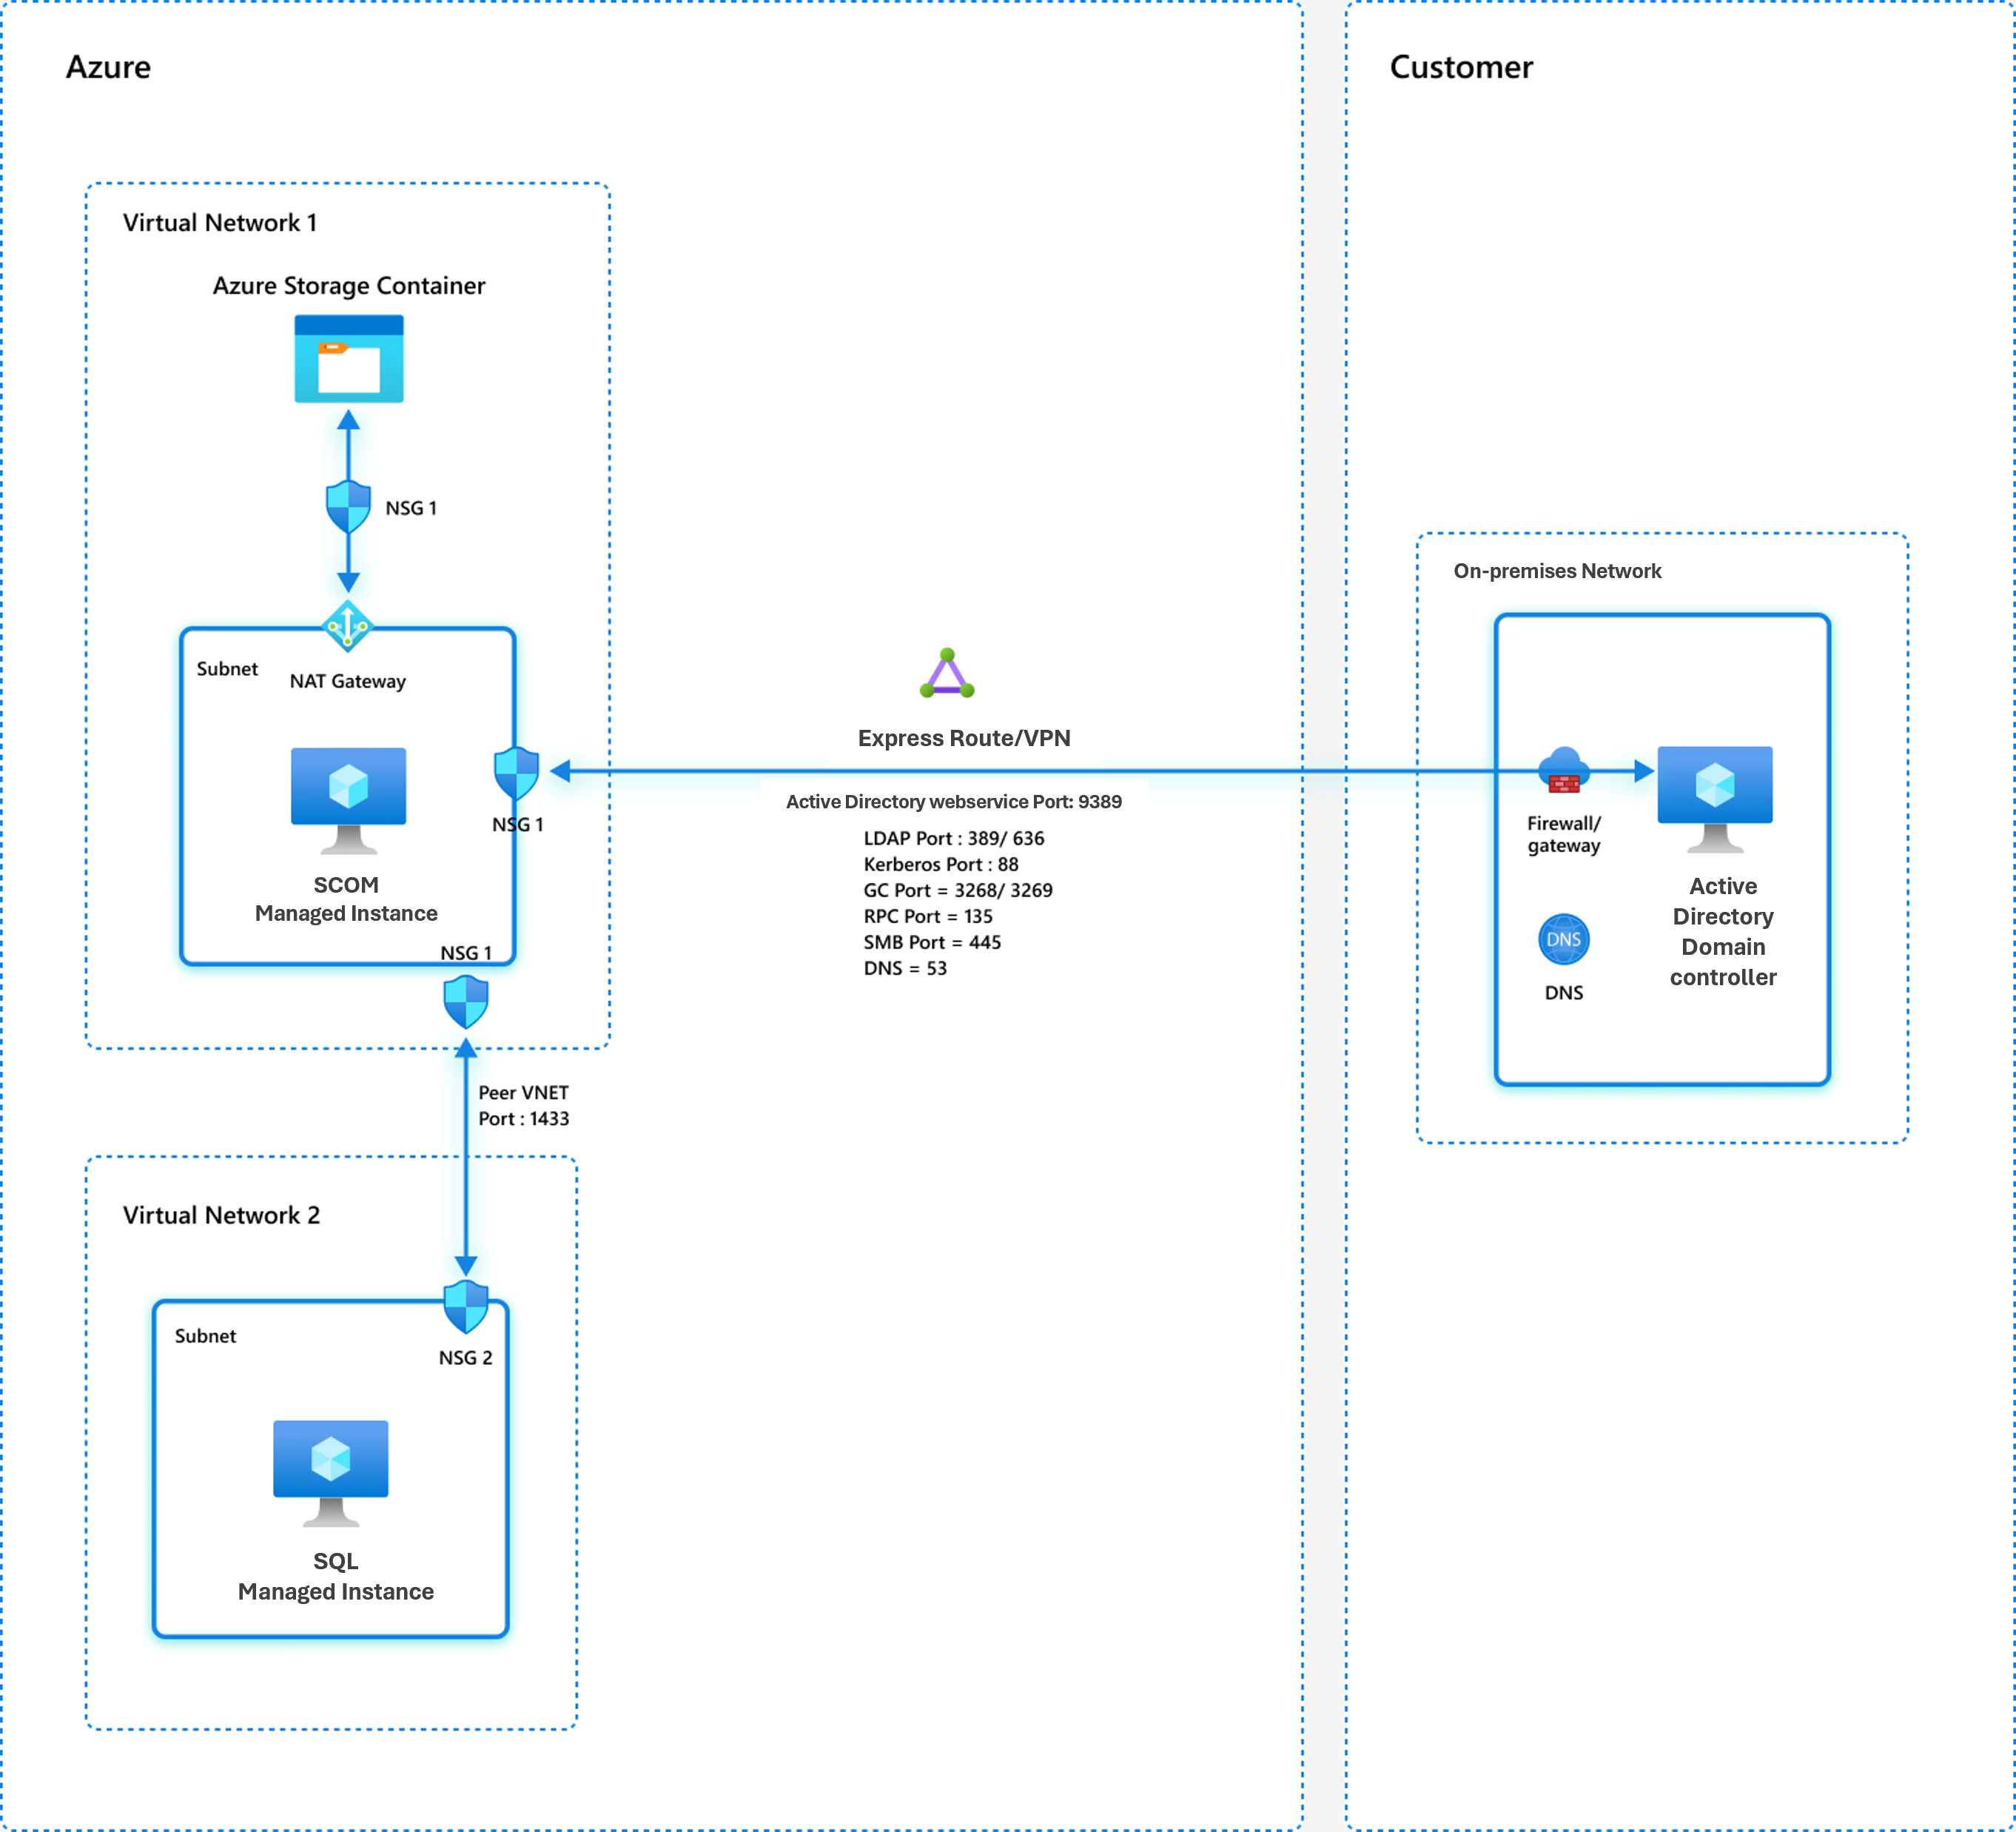 Screenshot that shows the network model 1 with the domain controller located on-premises.